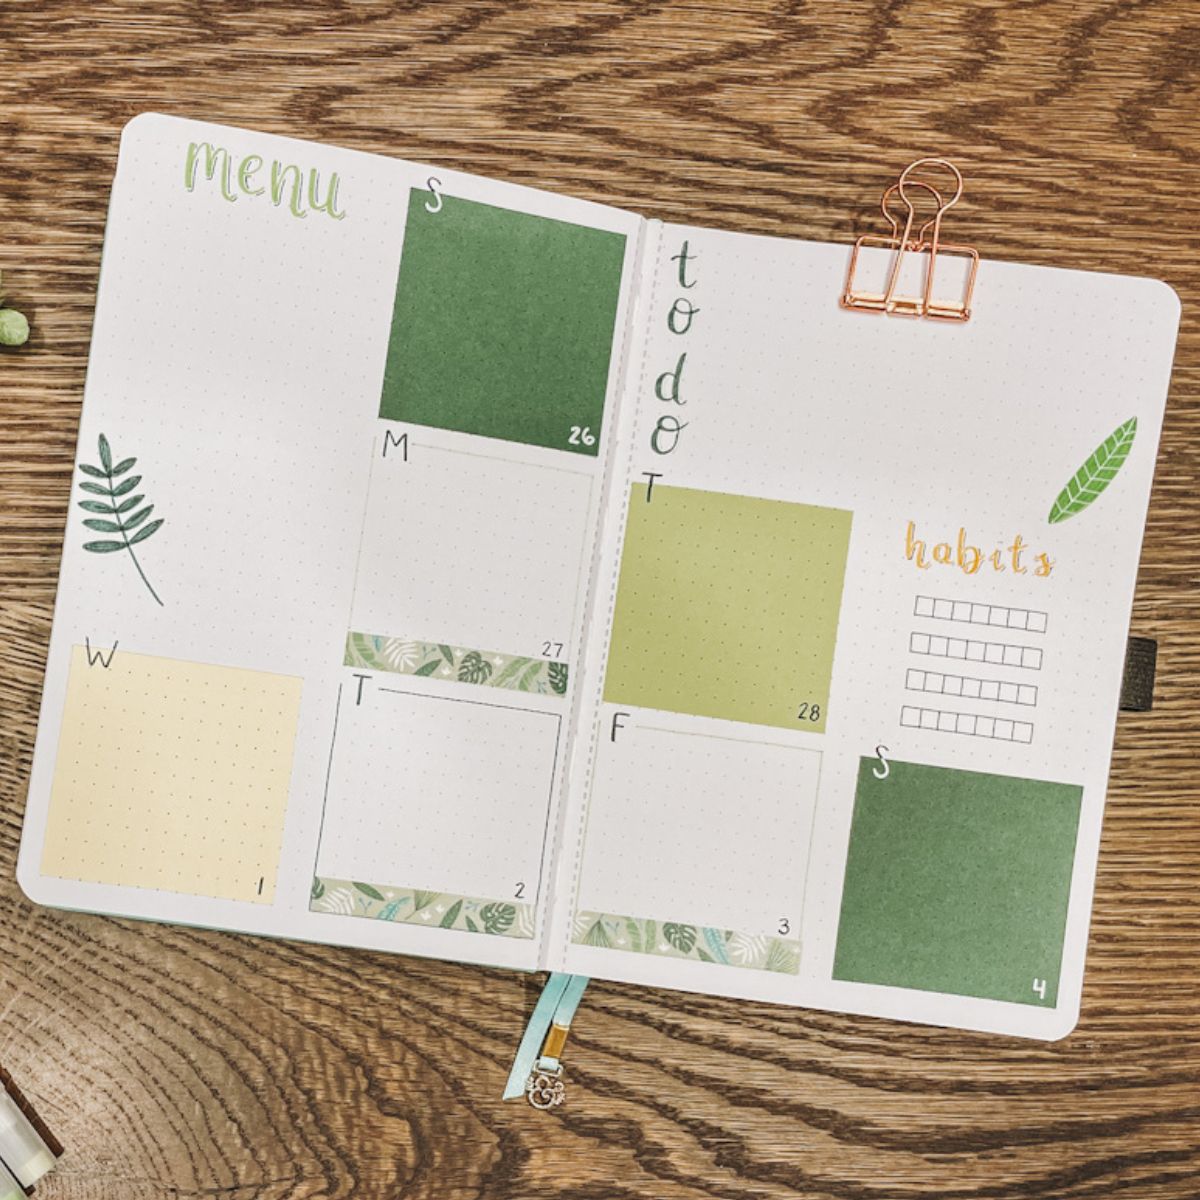 green themed bullet journal weekly spread laid out on a wood tabletop, includes a menu, habits, to do list and days of the week